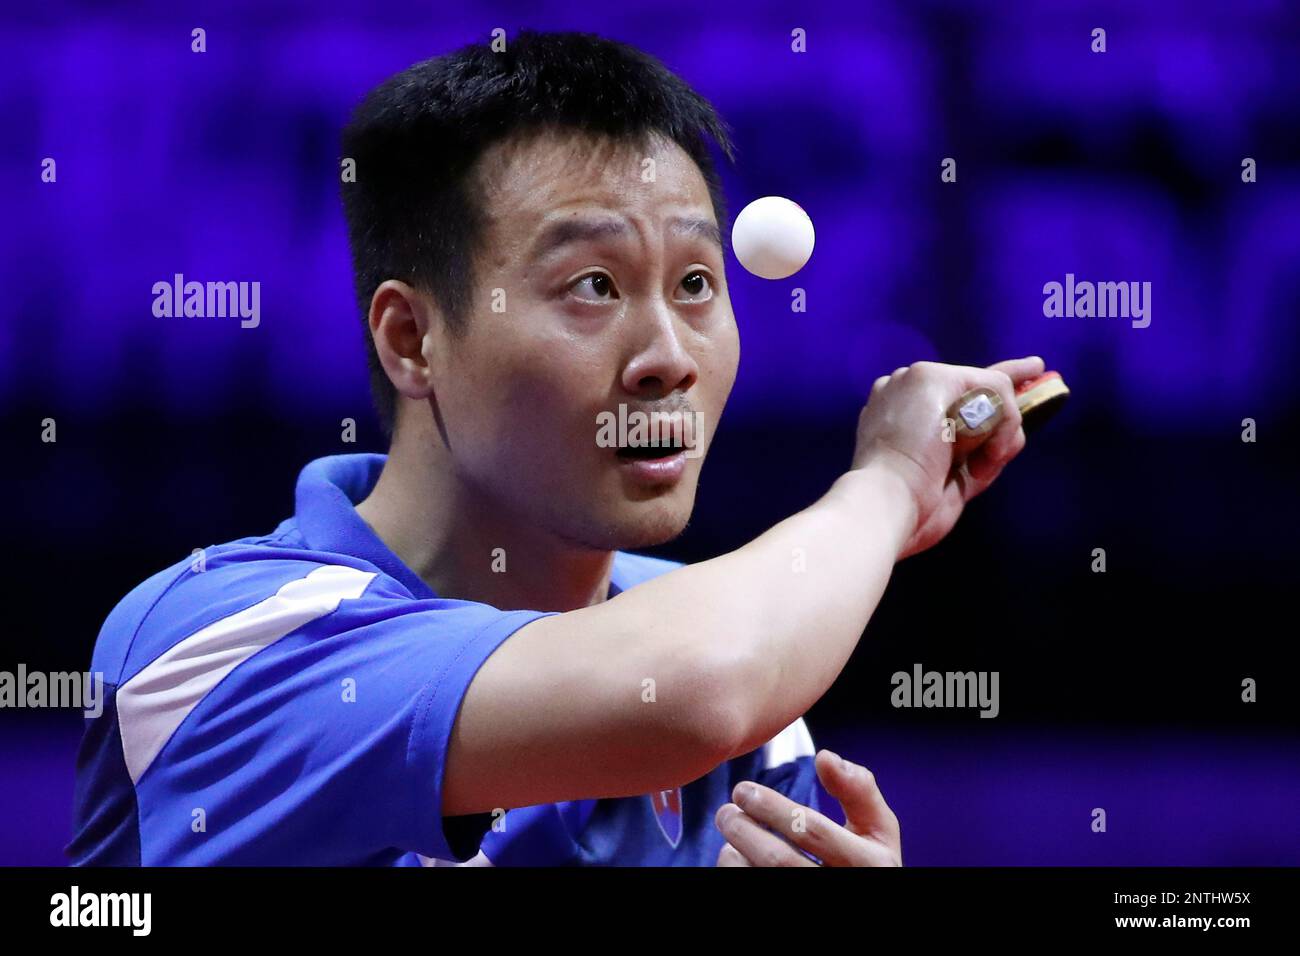 Yang Wang of Slovakia plays against An Ji Song of North Korea during their mens single round of 32 match of the World Table Tennis Championships in Budapest, Hungary, Wednesday, April 24,